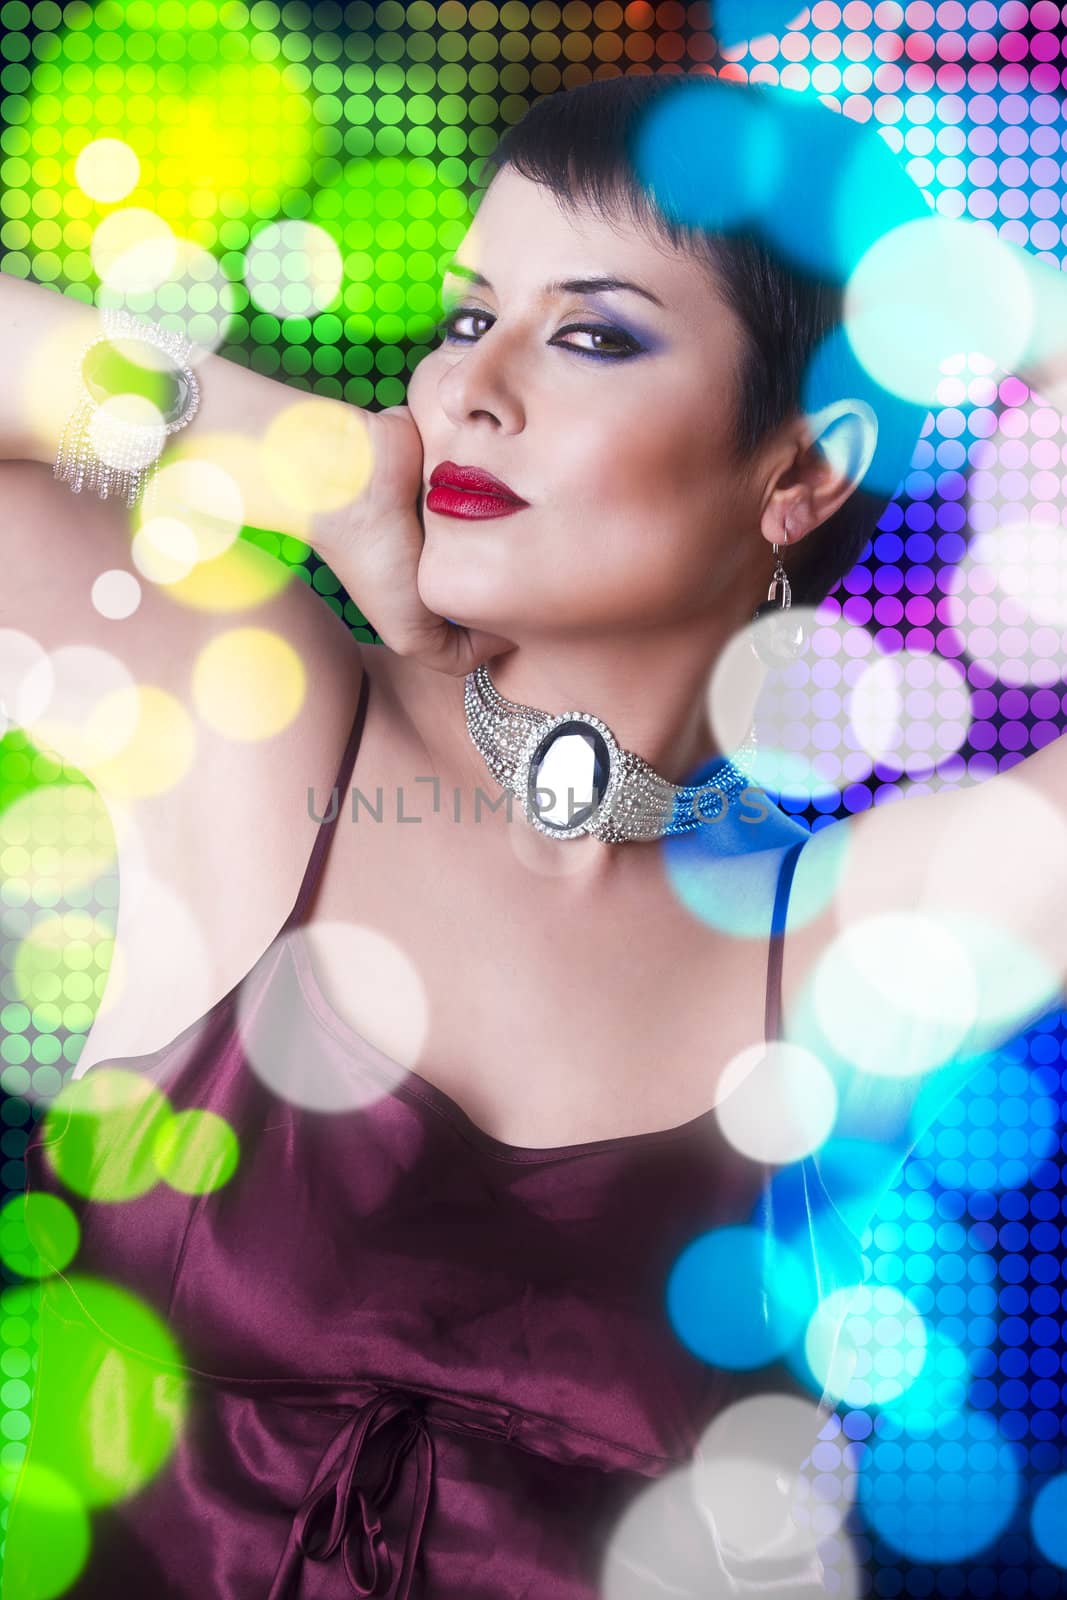 Attractive woman dancing in nightclub, colored background